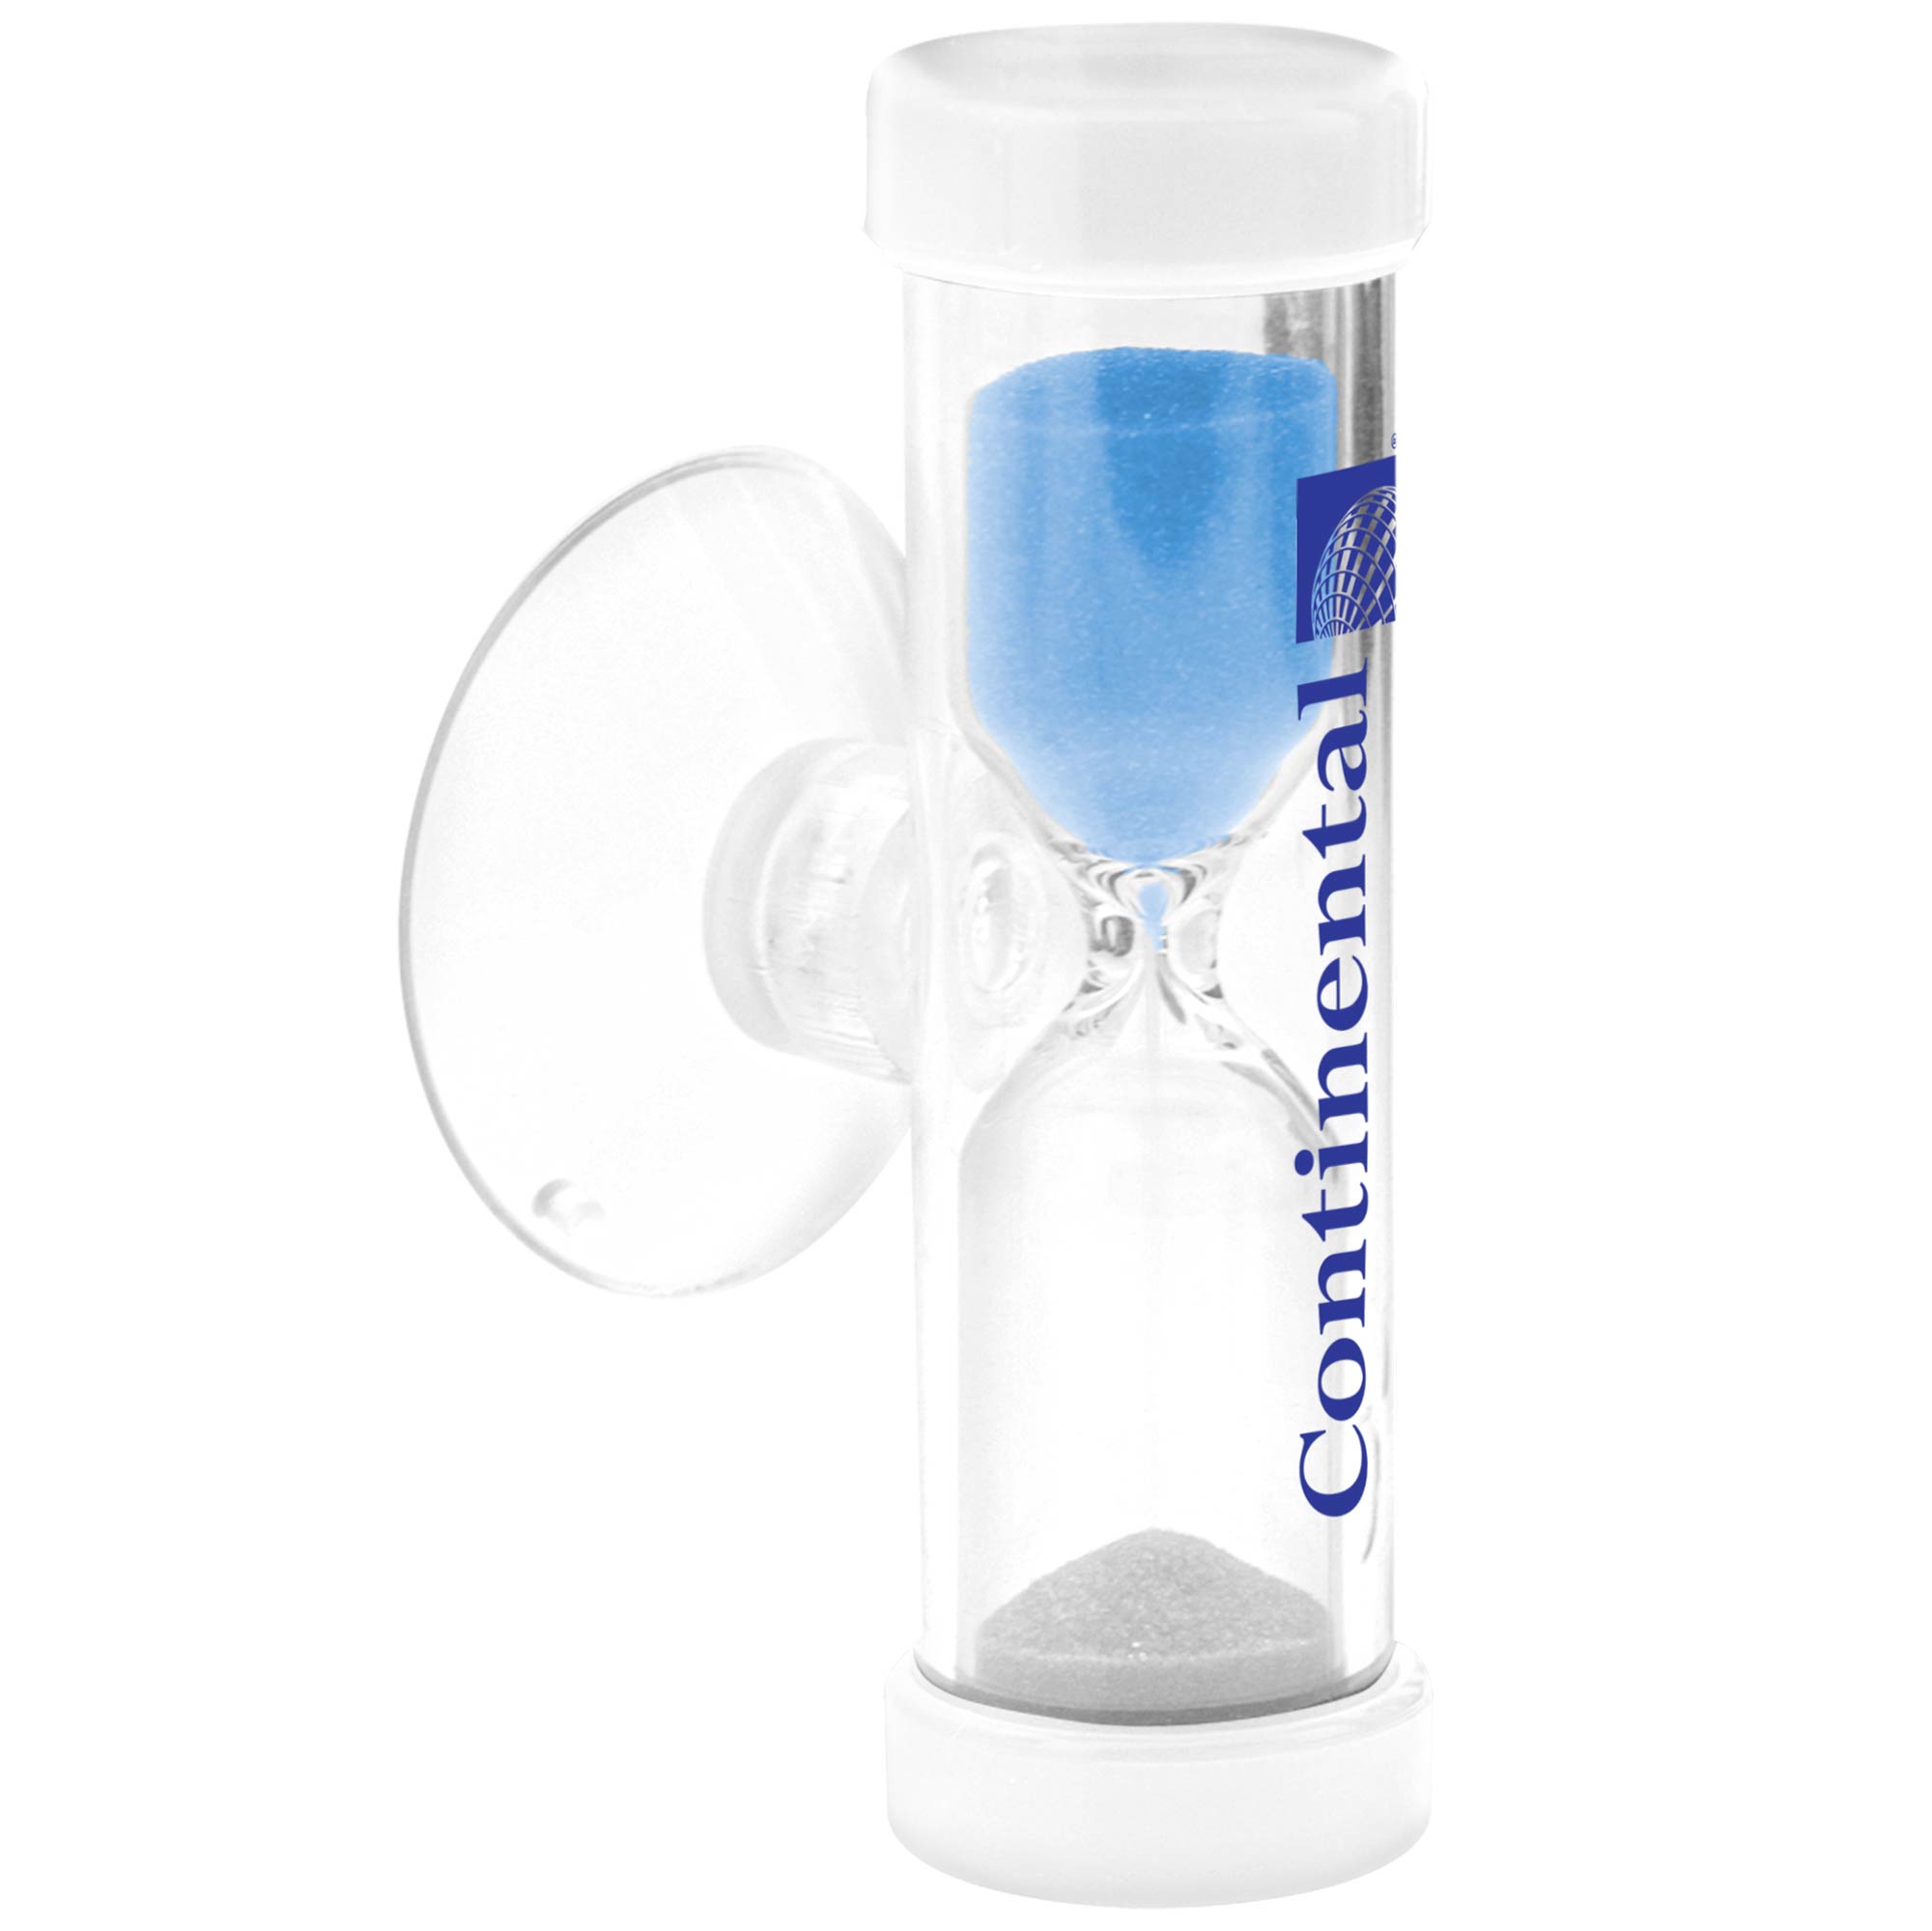 5 Minute Sand Timer - Promote water conservation by limiting shower times in a fun manner. Attach the separate suction cup to the shower surface. Optional waterproof imprintable disk available to visualize the promotion. Great opportunity to advertise your company in good taste. Add a Full Color Diameter Insert Full Color print ONLY the front side. 4-inch diameter Insert goes behind the timer/in front of the suction cup.